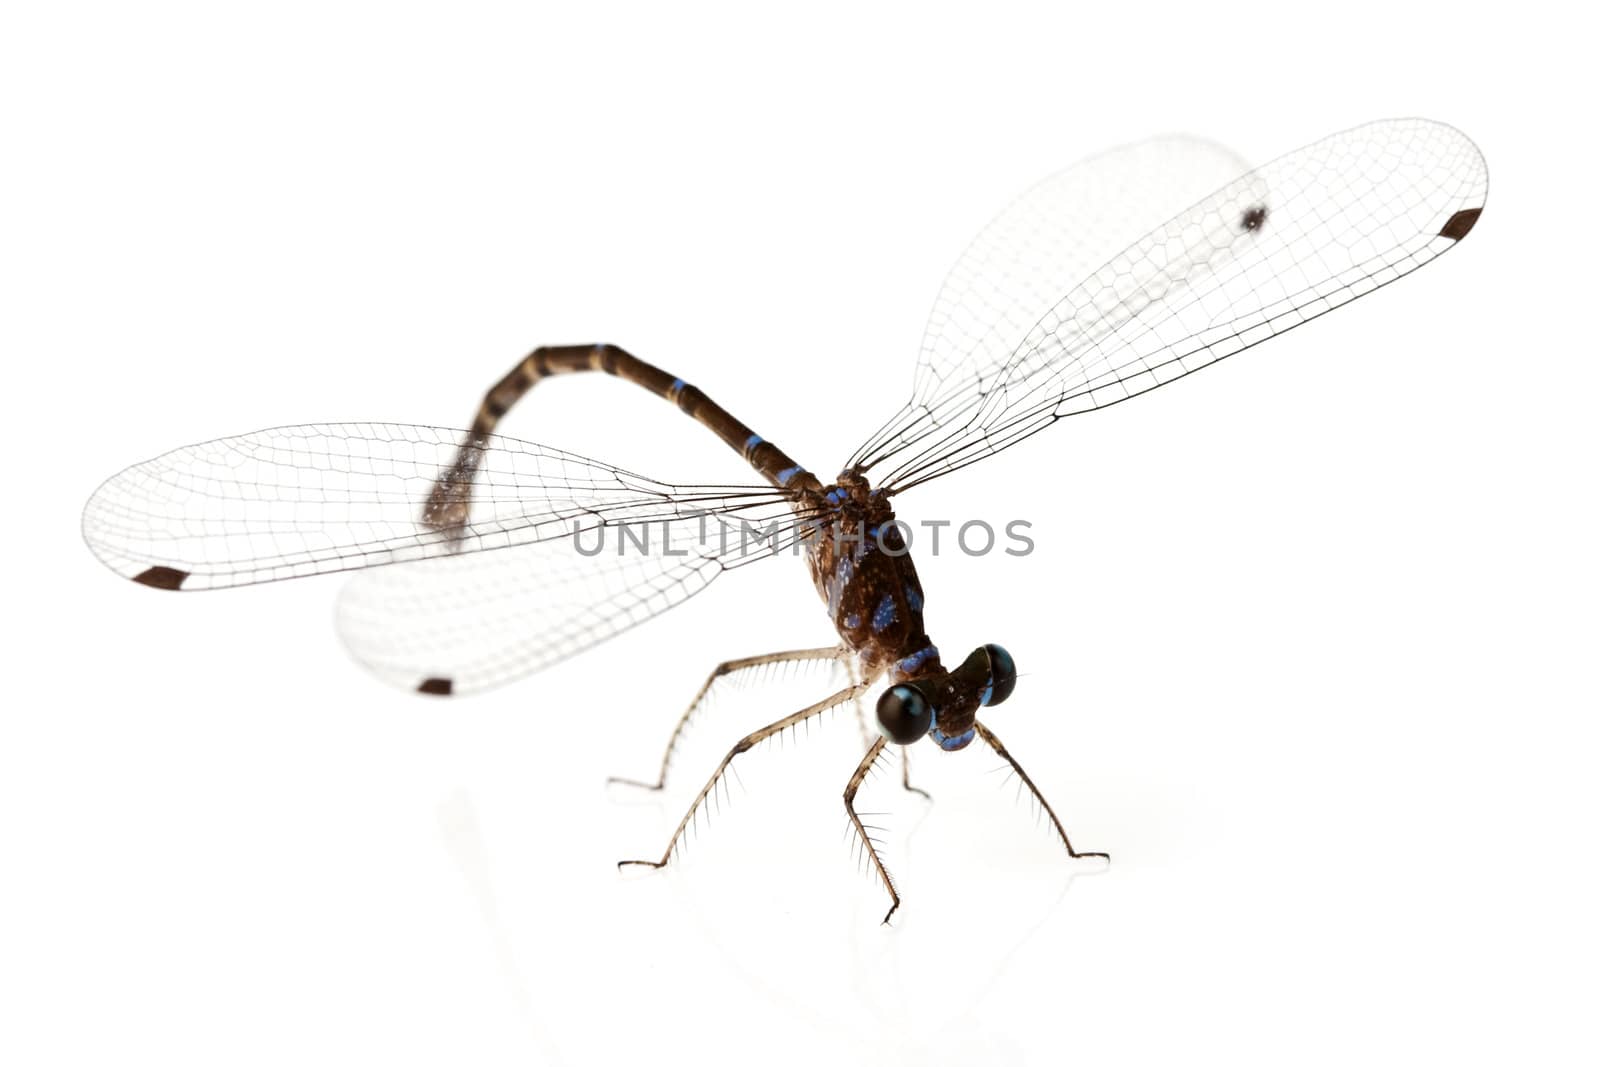 Dragonfly on white background shallow depth of field focus is head